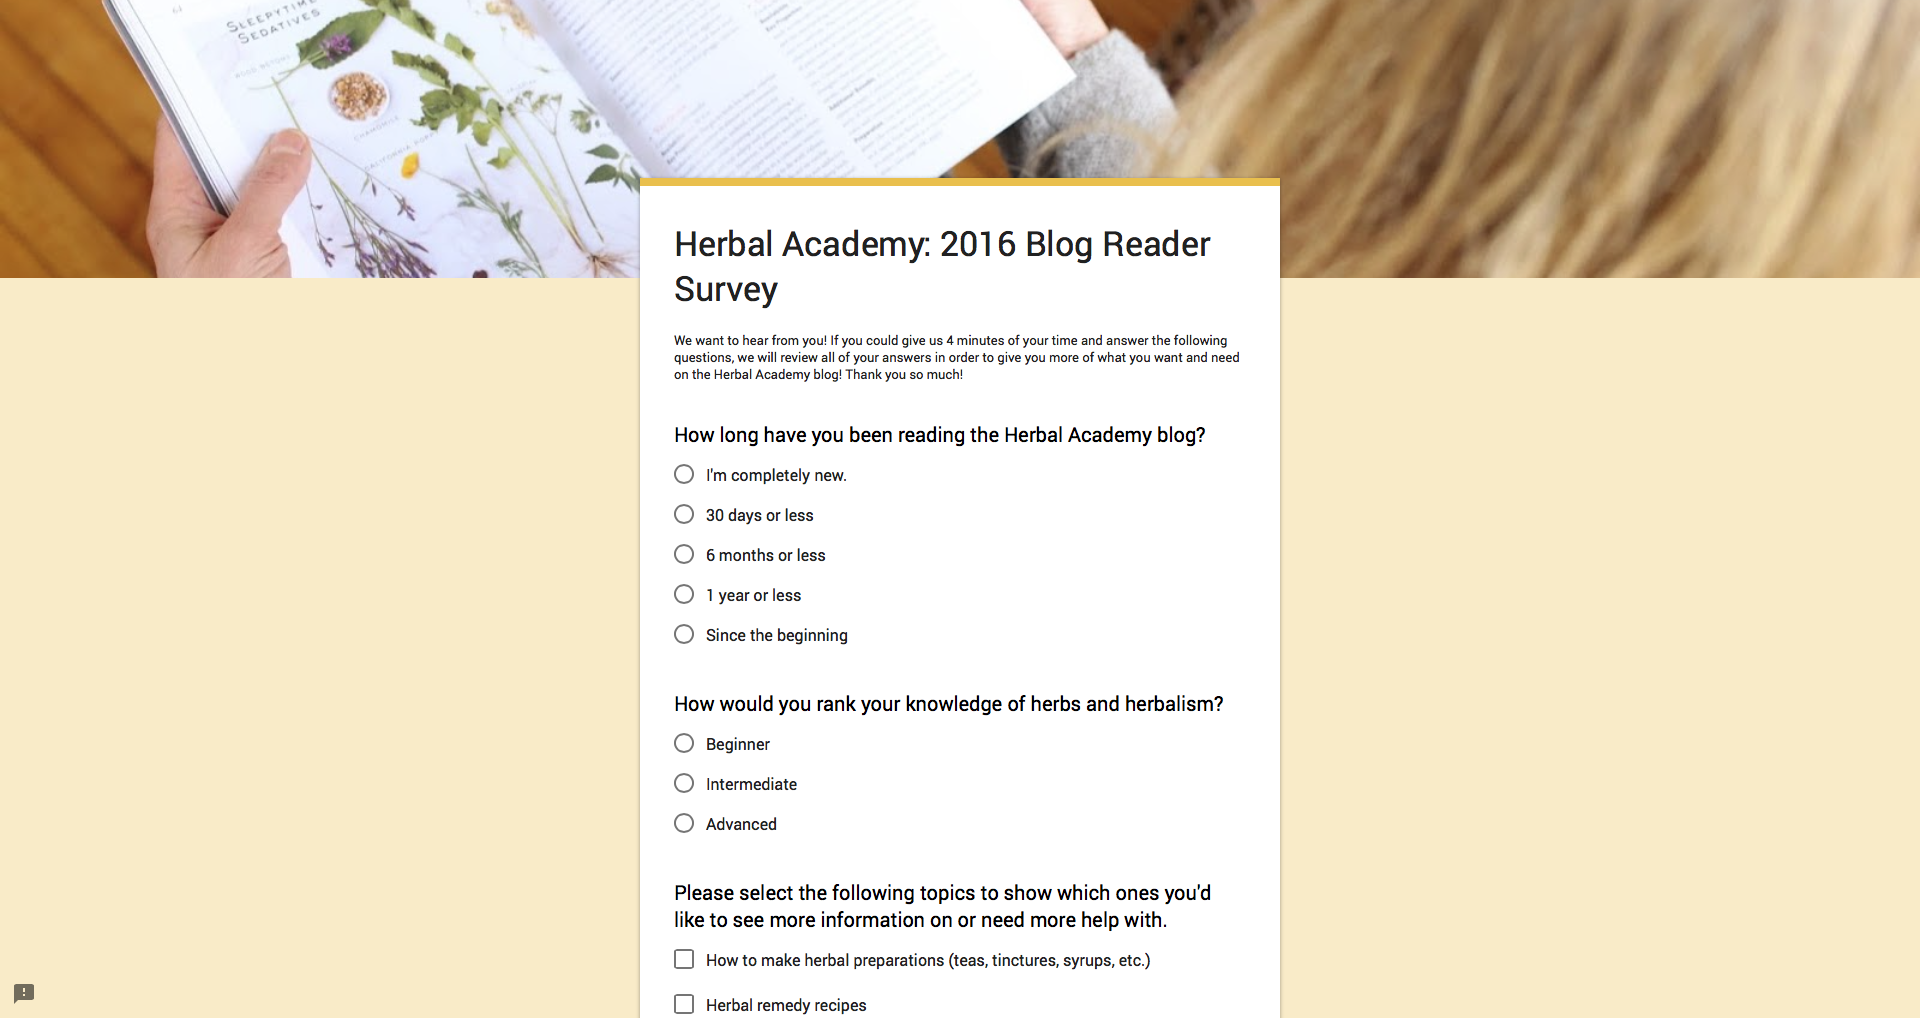 2016 Reader Survey | Herbal Academy | We want to hear from you! Fill our our 2016 reader survey and tell us what you want more of on the Herbal Academy blog in 2017.